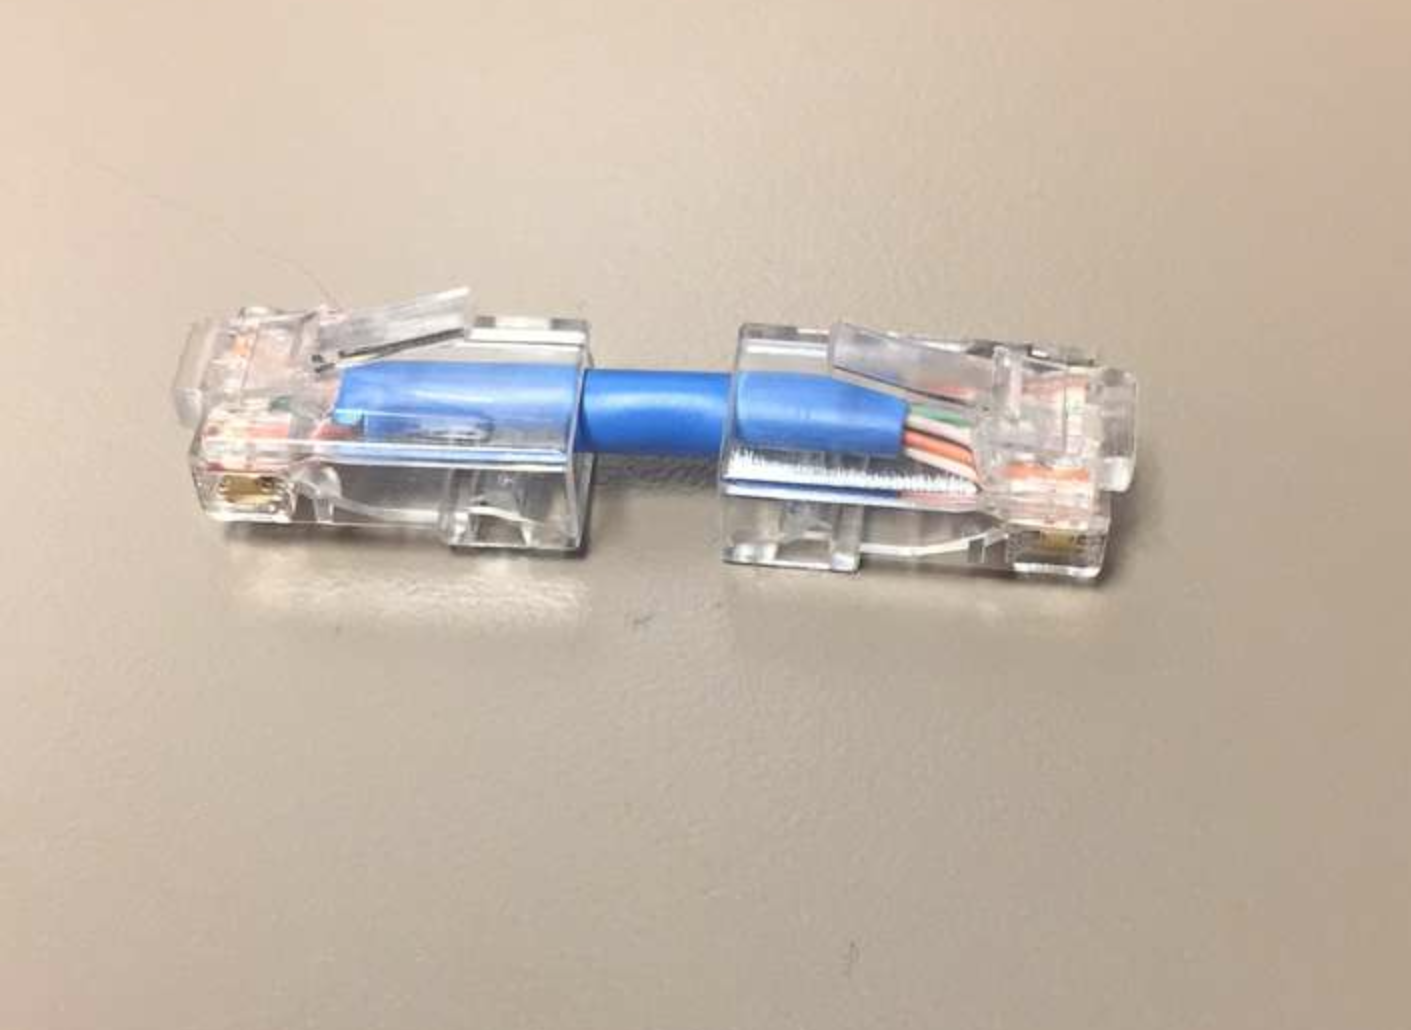 Boss told me to make an ethernet cable today. No specification of length. Jokes on them.